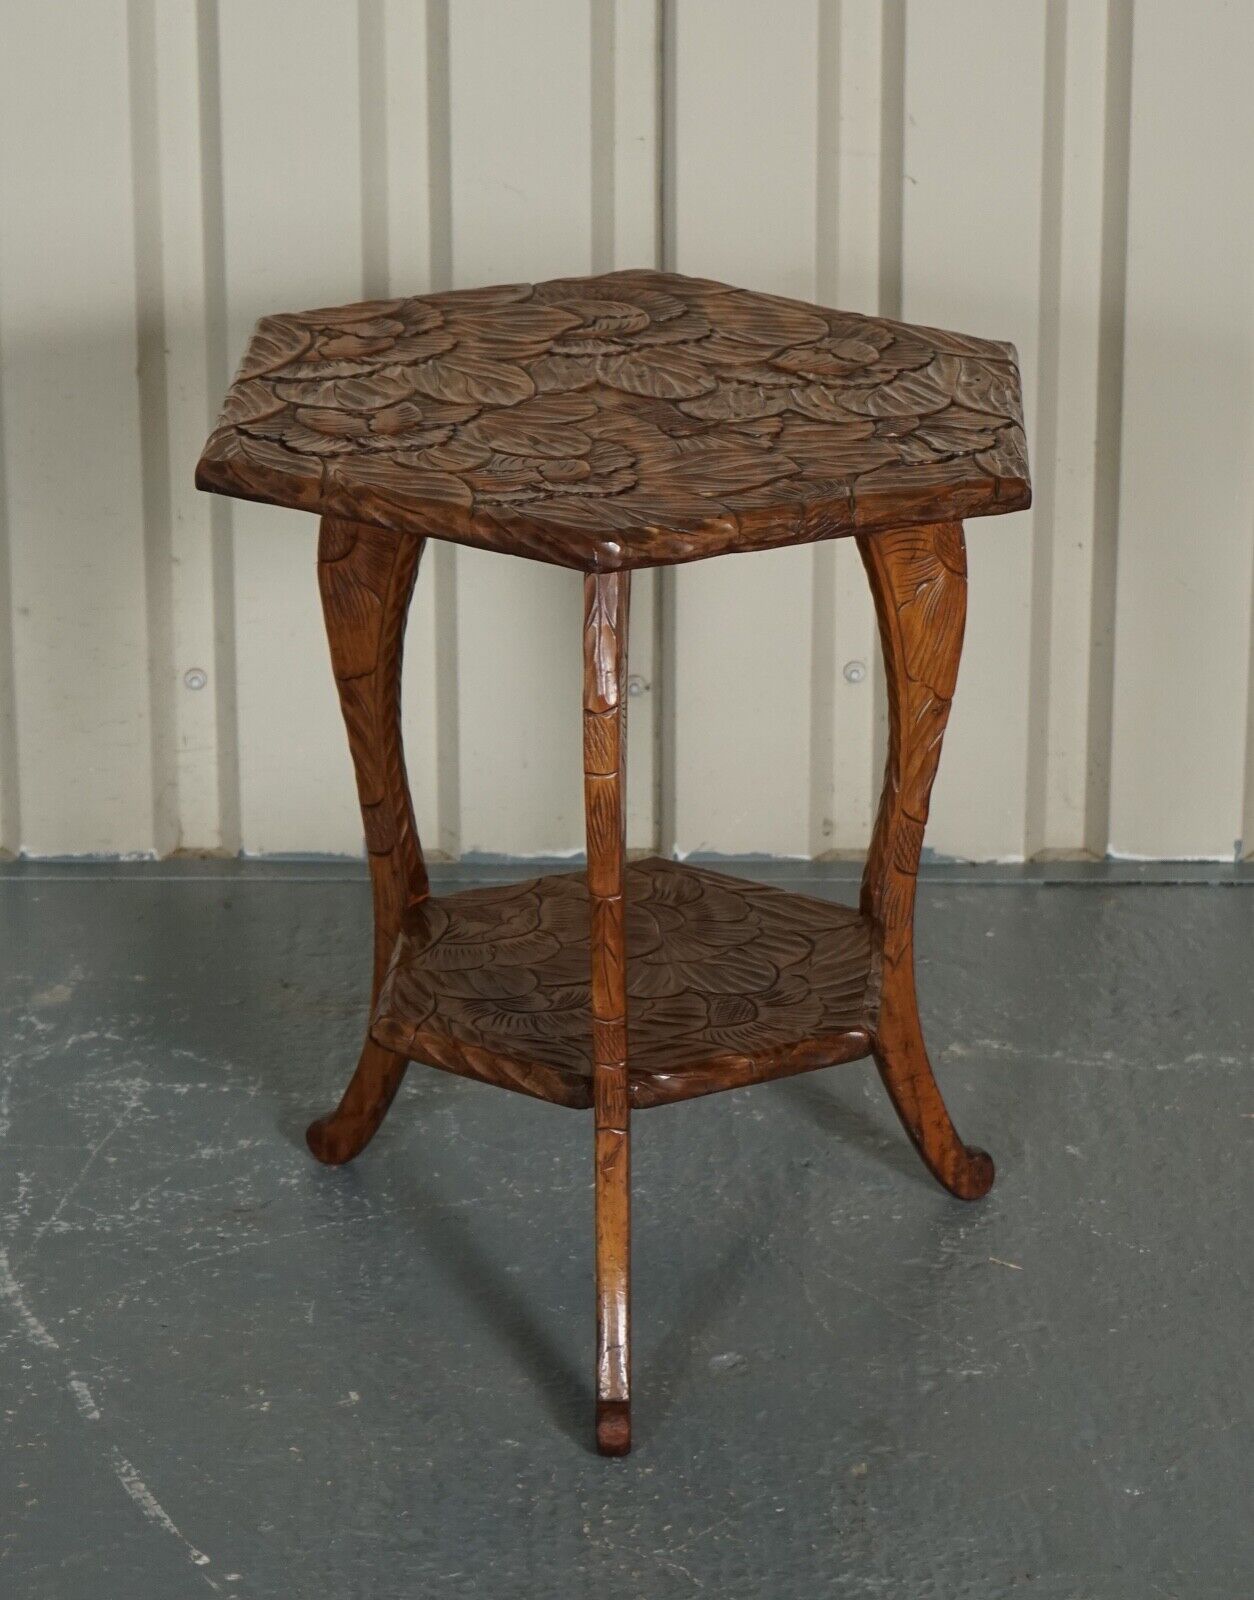 EARLY 19TH CENTURY LIBERTY'S LONDON HAND CARVED OCCASIONAL SIDE END LAMP TABLE